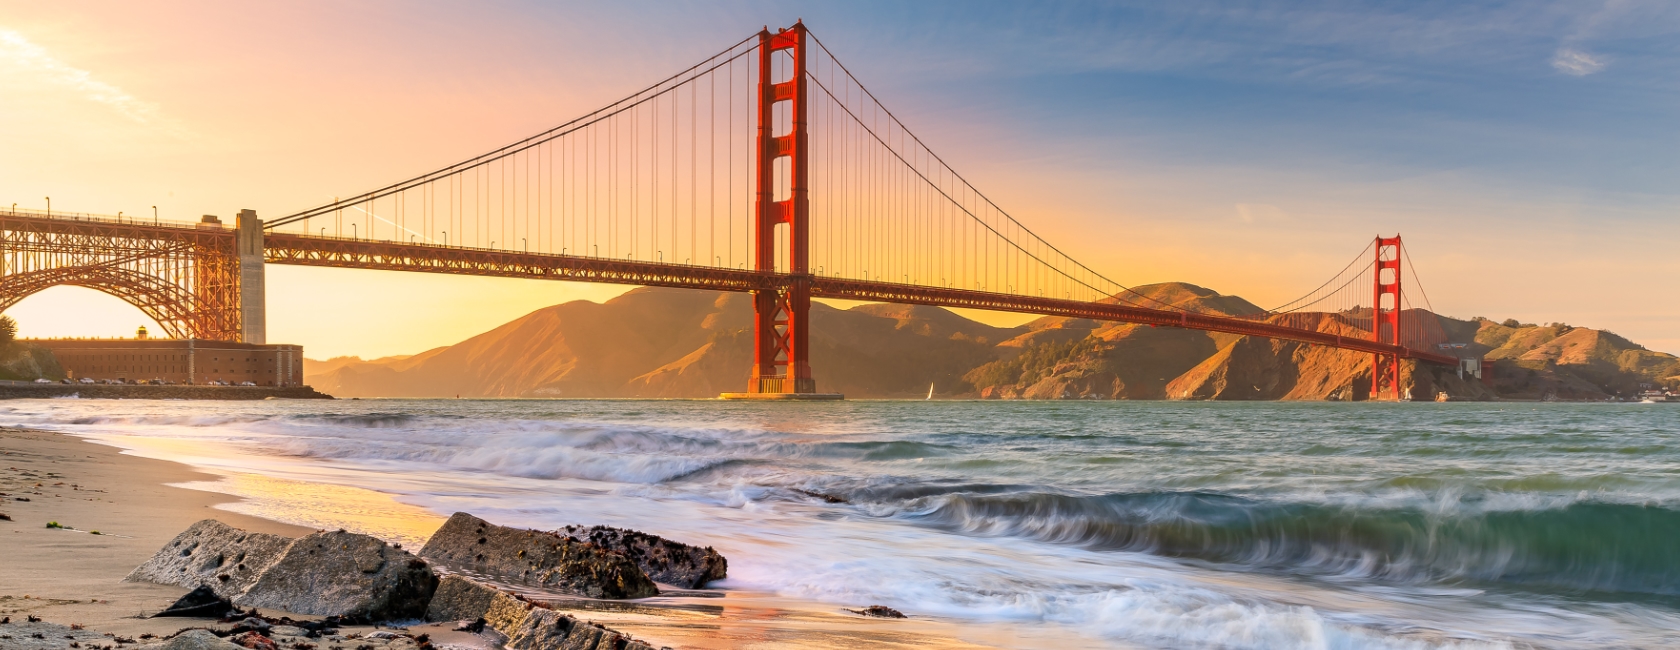 AccelMDs uniquely connects you to the Bay Area’s top specialists giving you priority access to optimized care programs designed to get you better as quickly as possible.